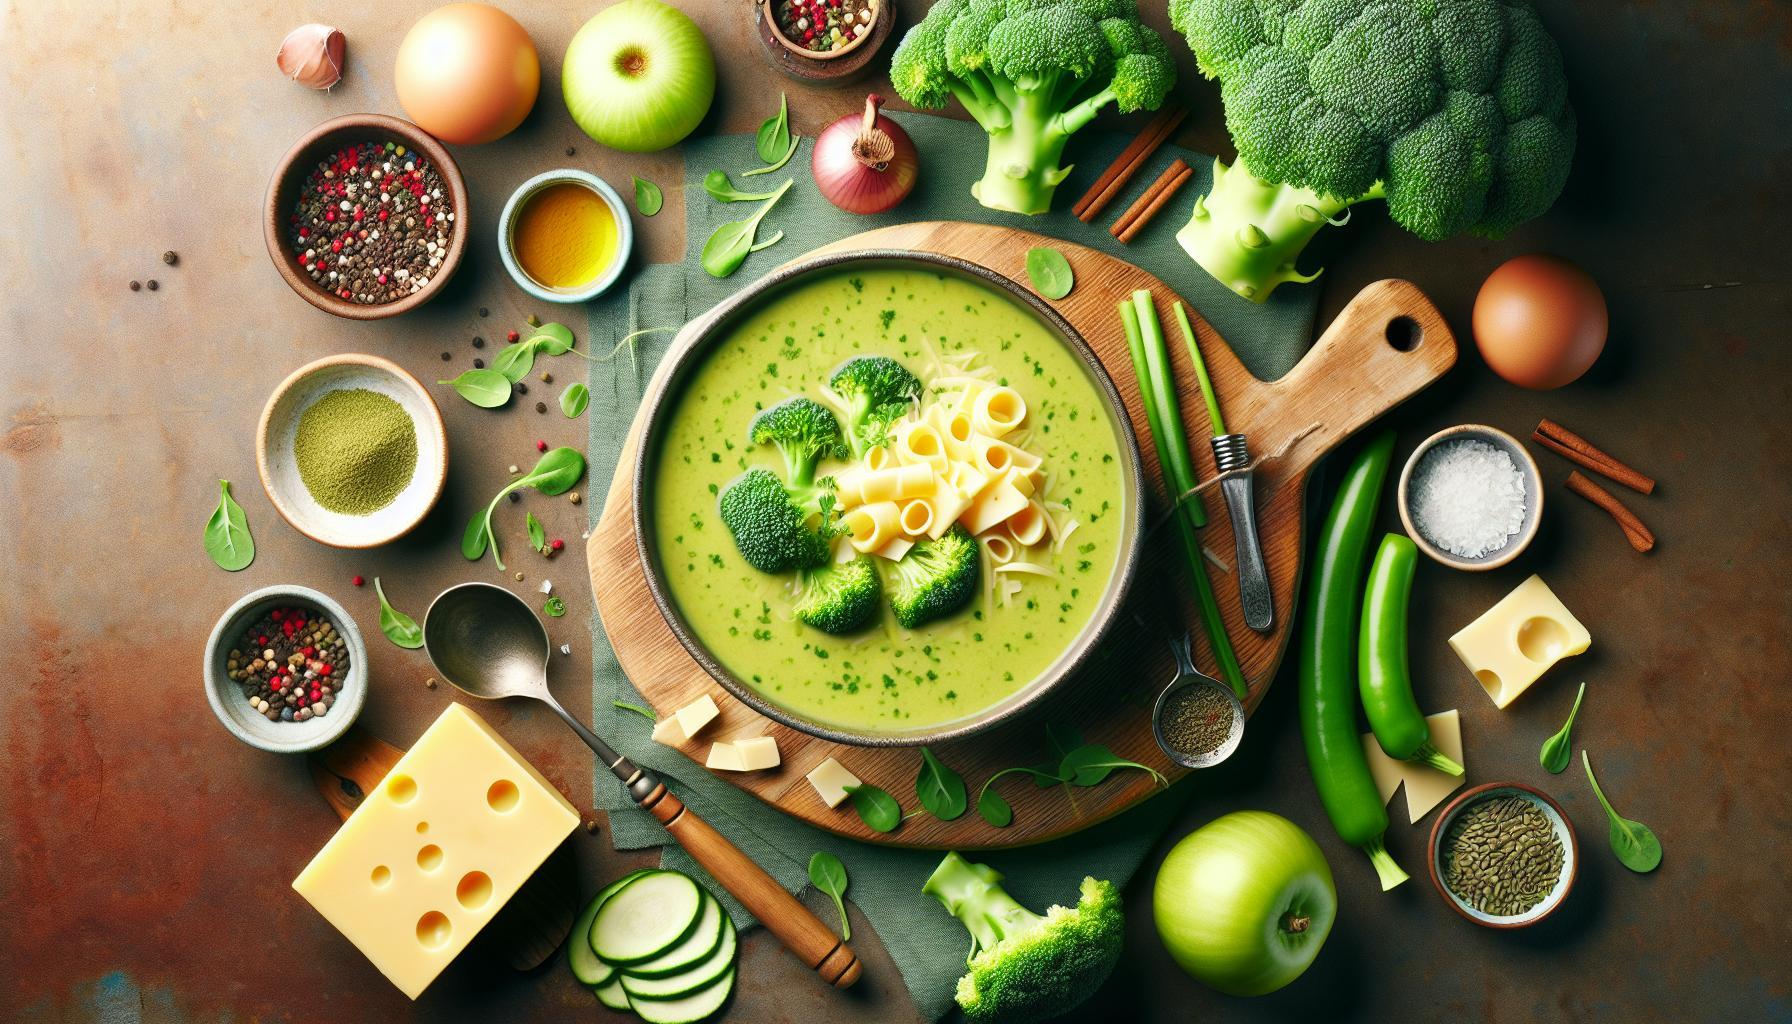 Delicious & Nutritious: Ultimate Vegan Broccoli and Cheese Soup Recipe